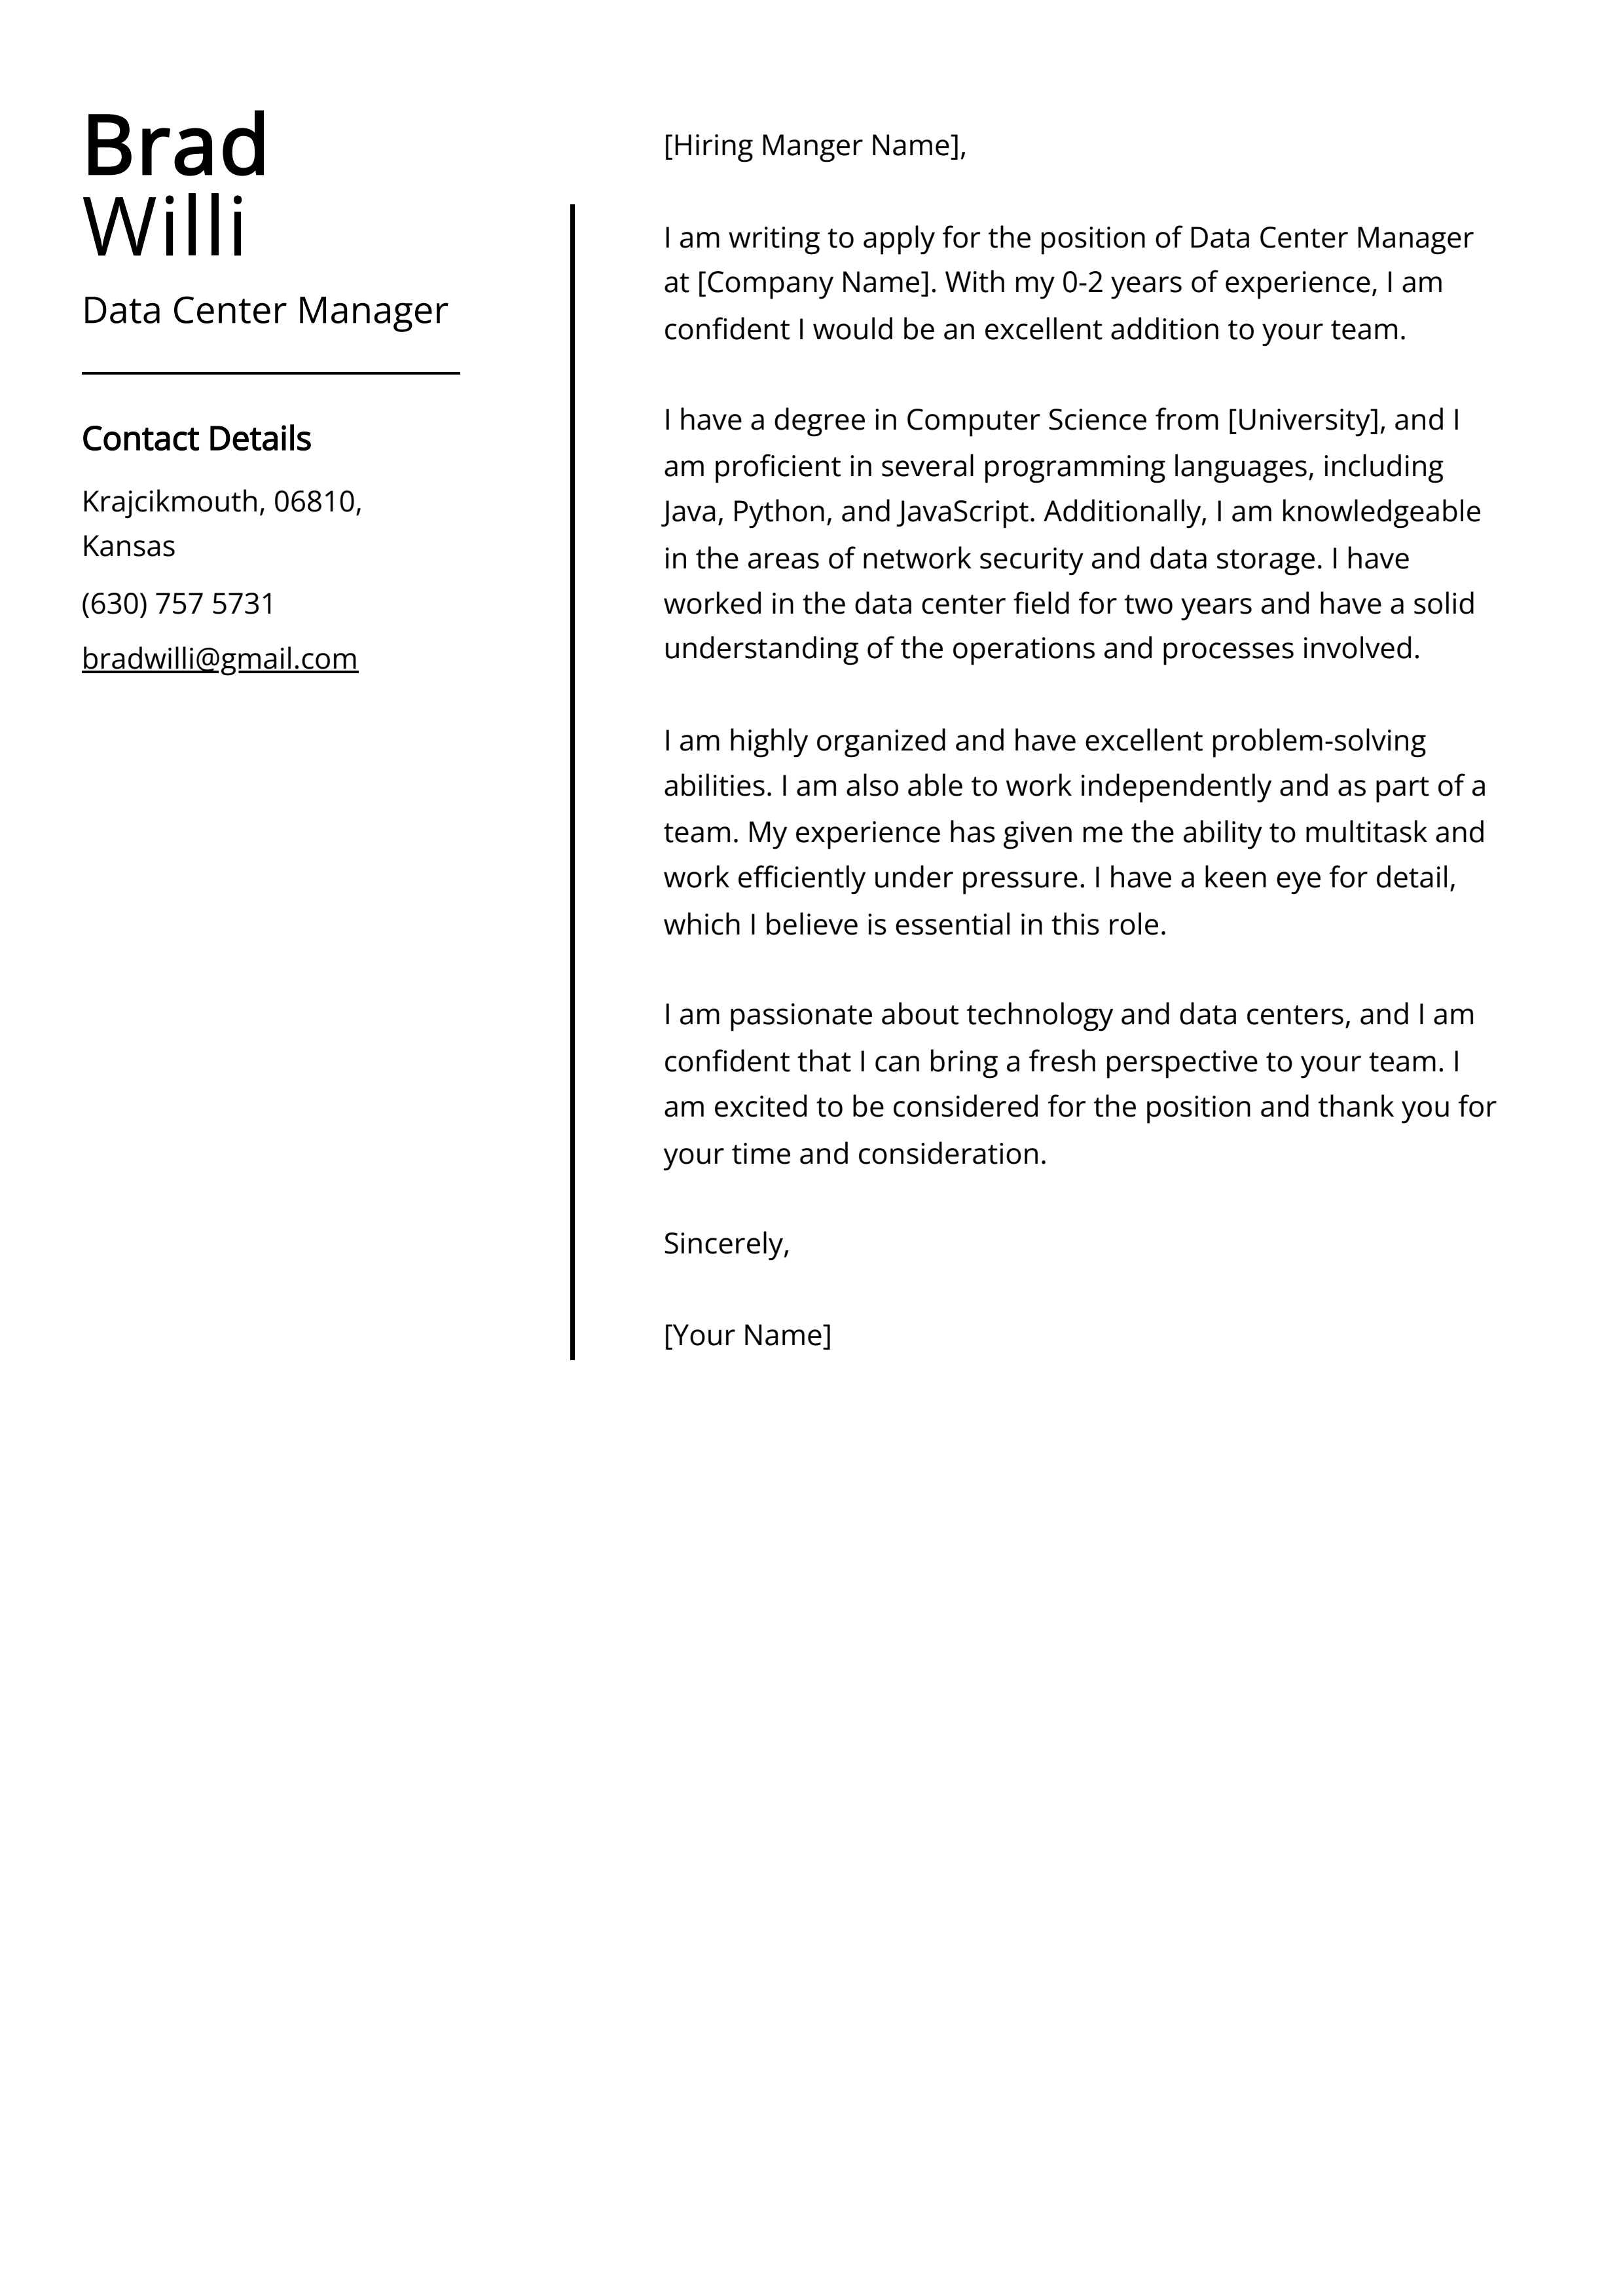 Data Center Manager Cover Letter Example